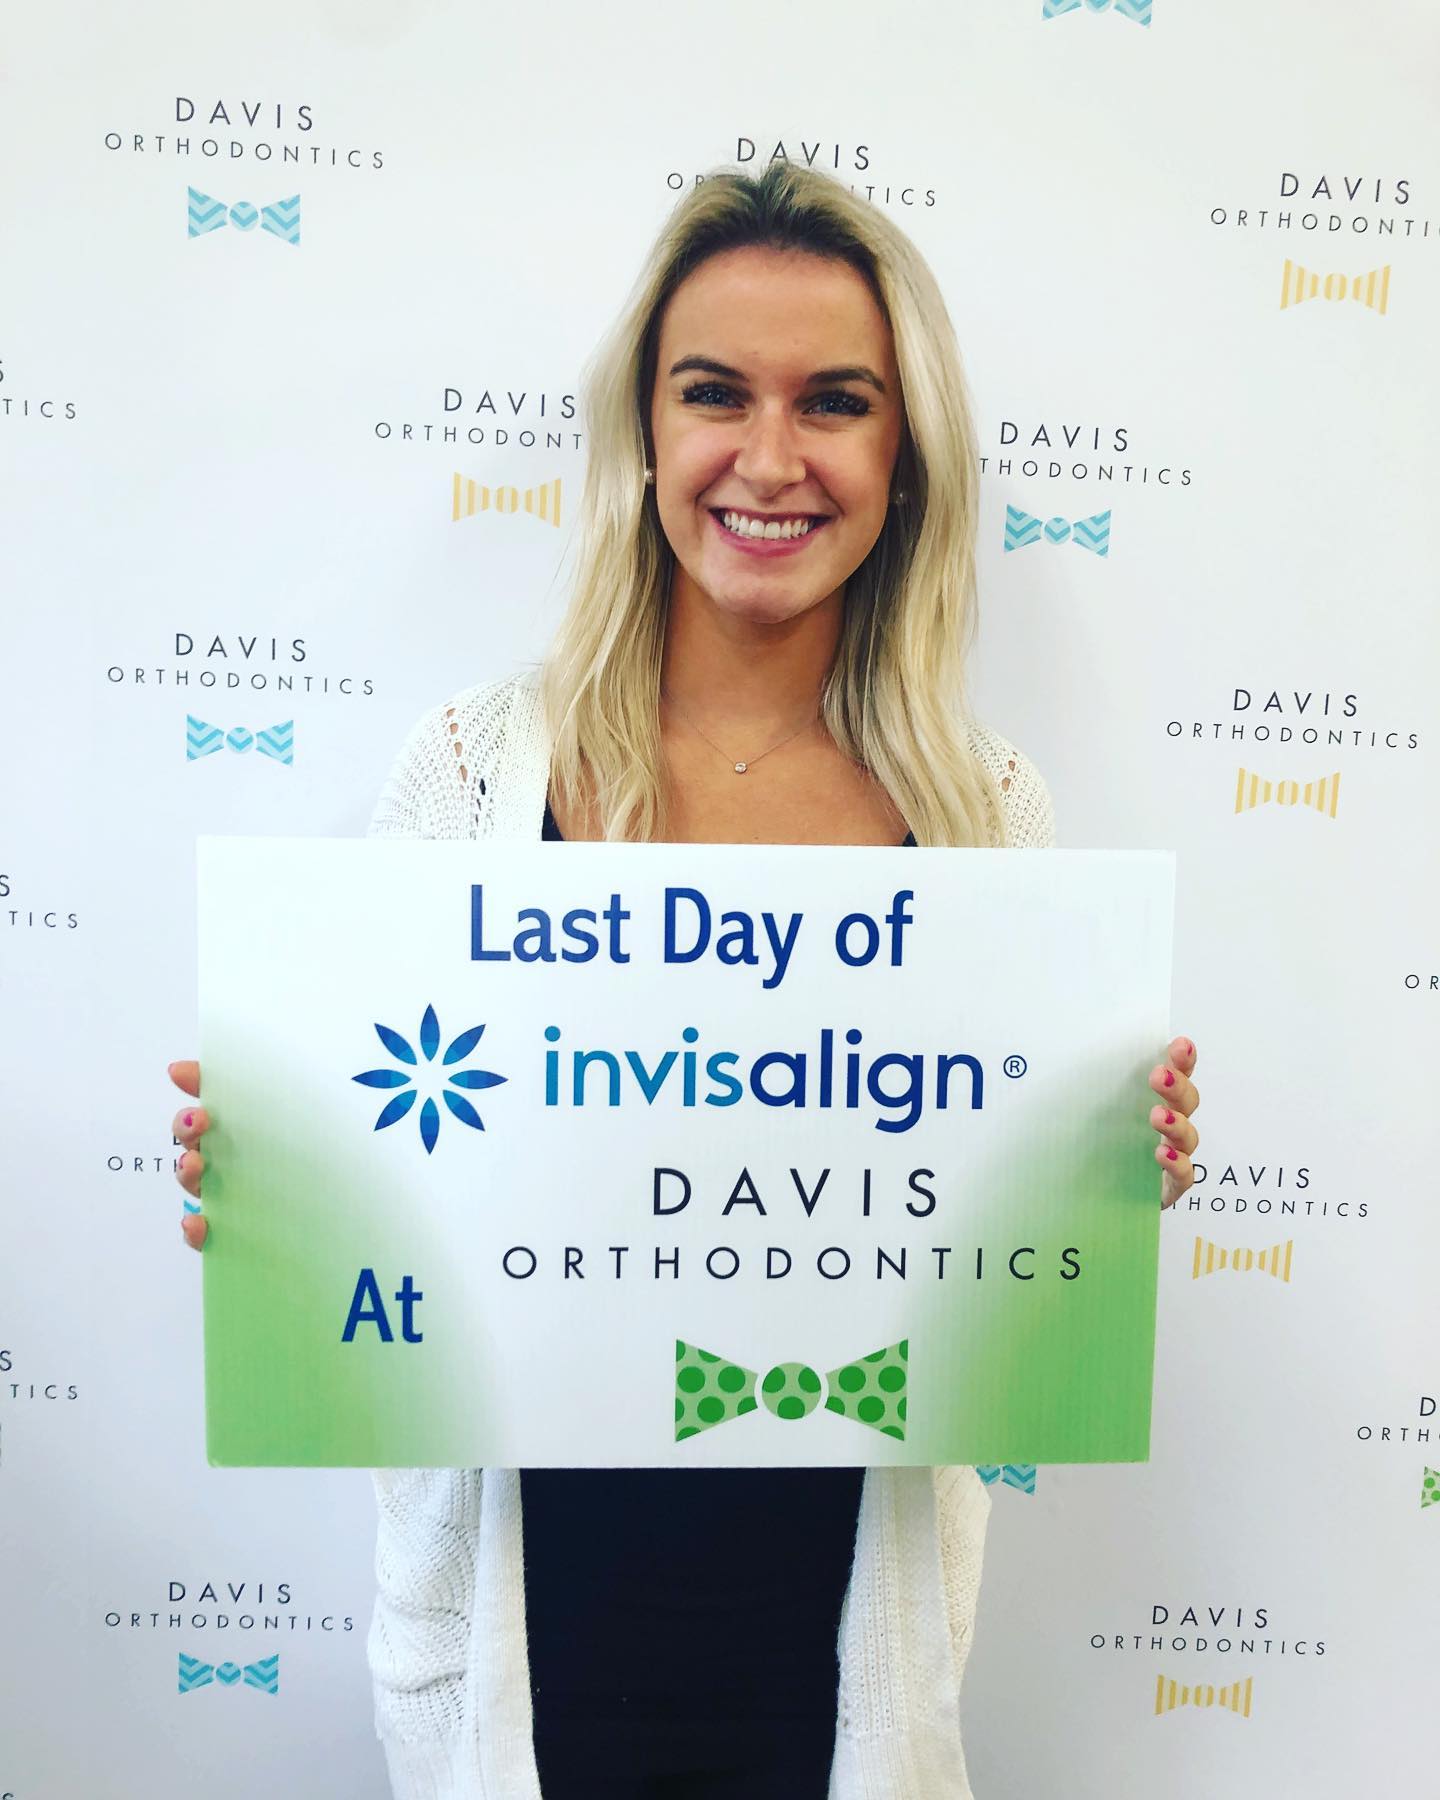 a-lady-on-her-last-day-of-invisalign-treatment